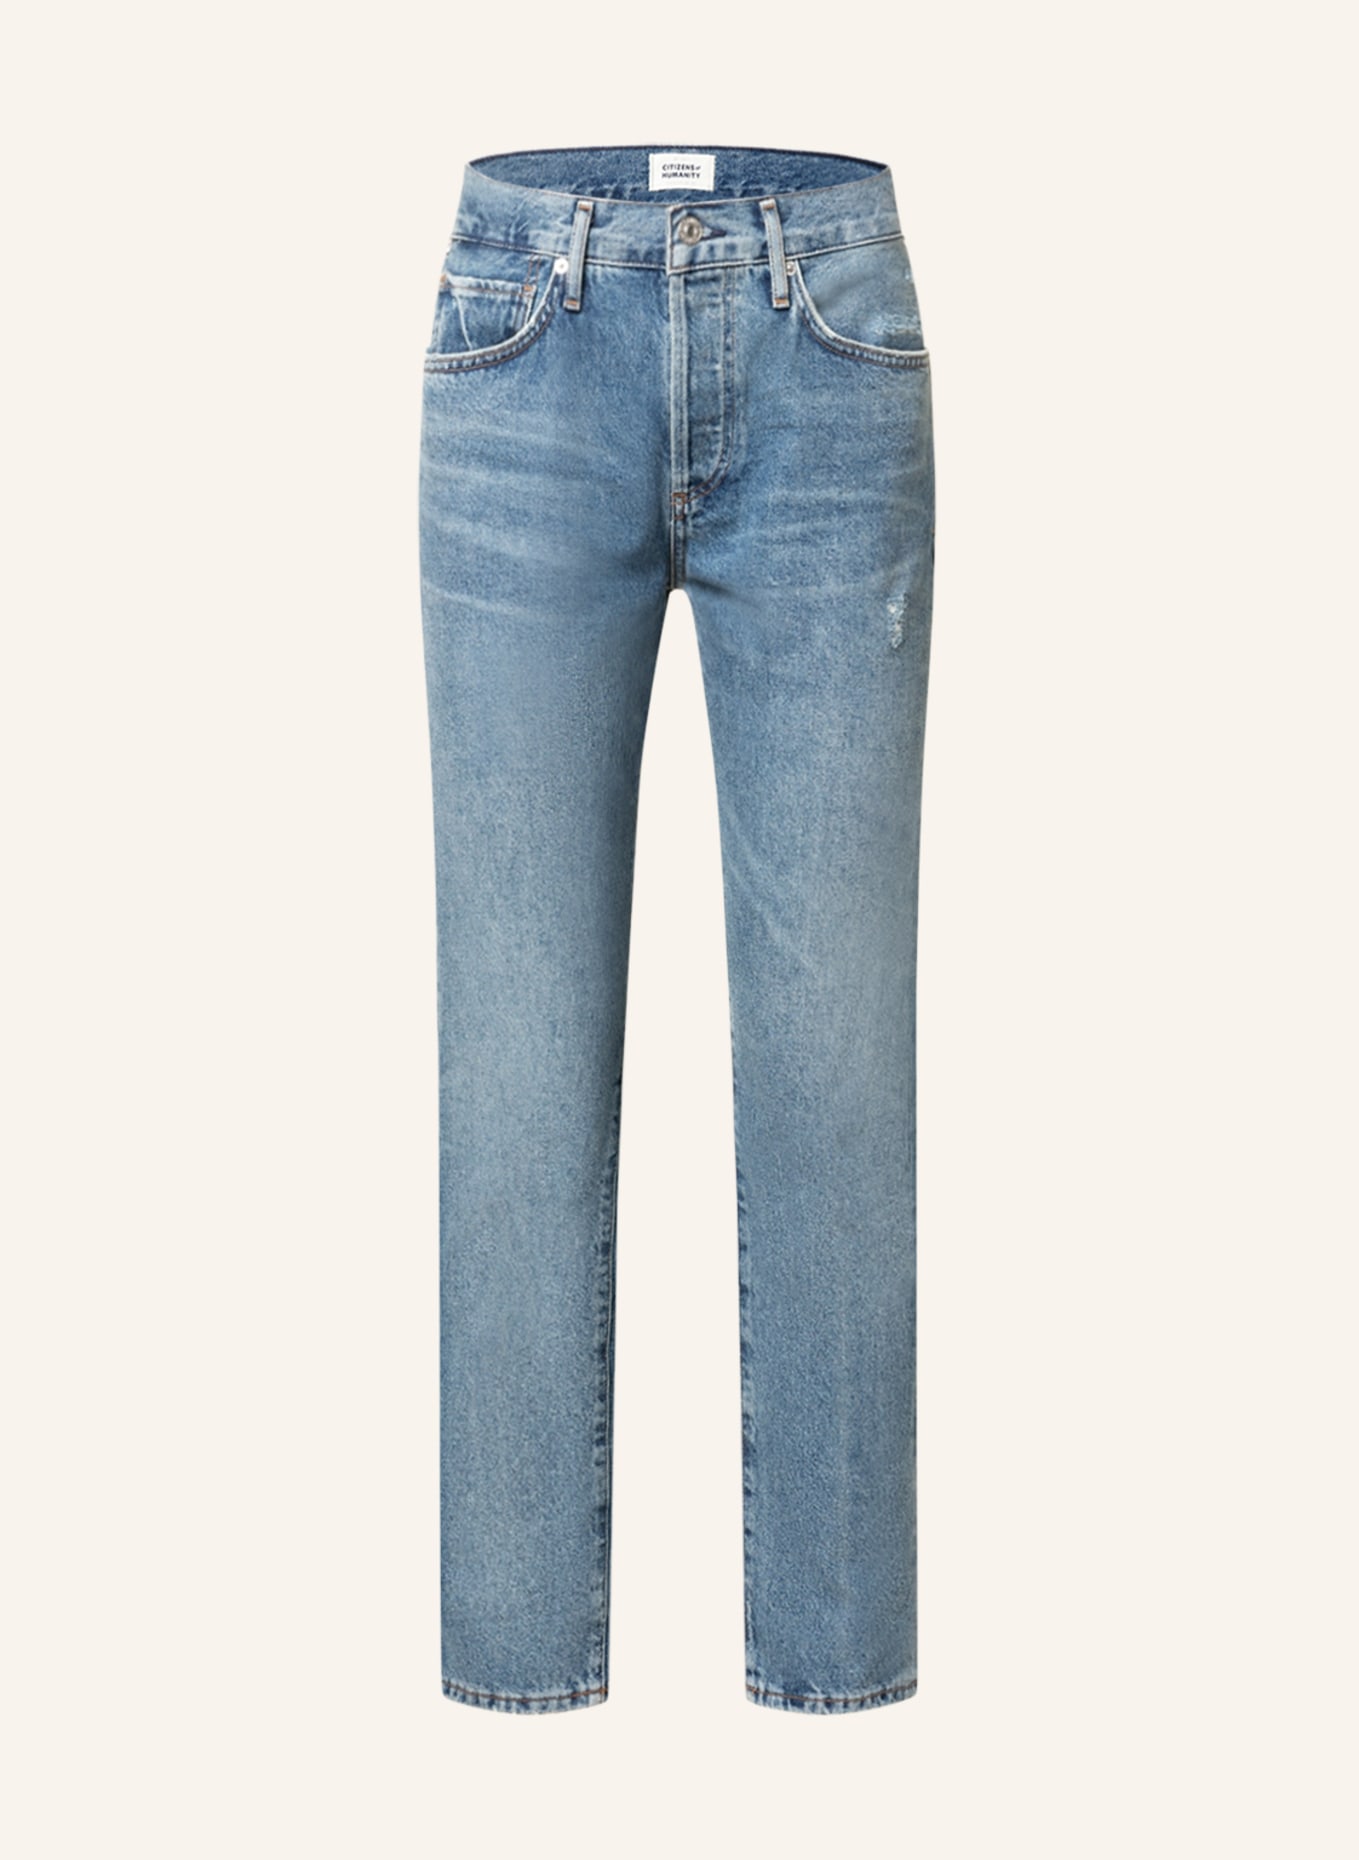 CITIZENS of HUMANITY Straight Jeans EMERSON, Farbe: Big Sky md vint indigo(Bild null)